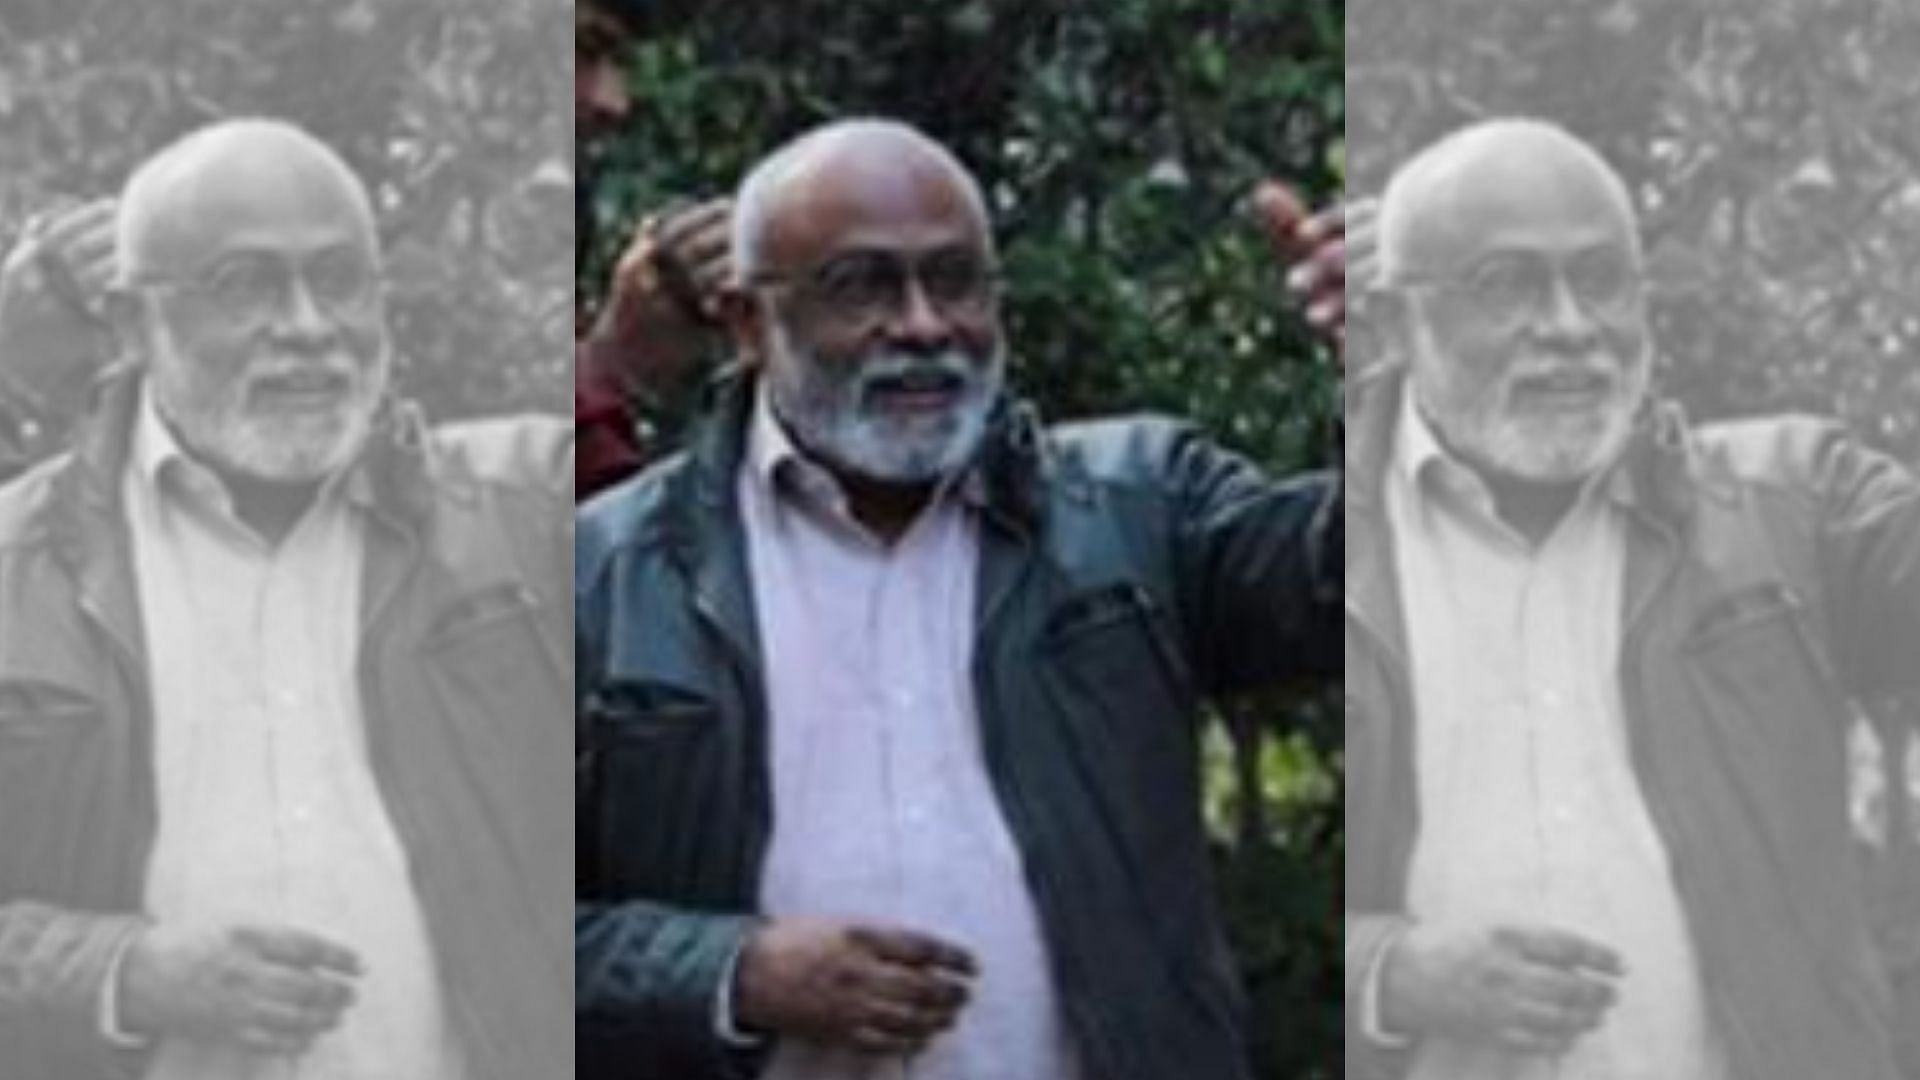 The National Investigation Agency (NIA) has summoned Delhi University professor PK Vijayan for questioning in connection with the Bhima-Koregaon case.